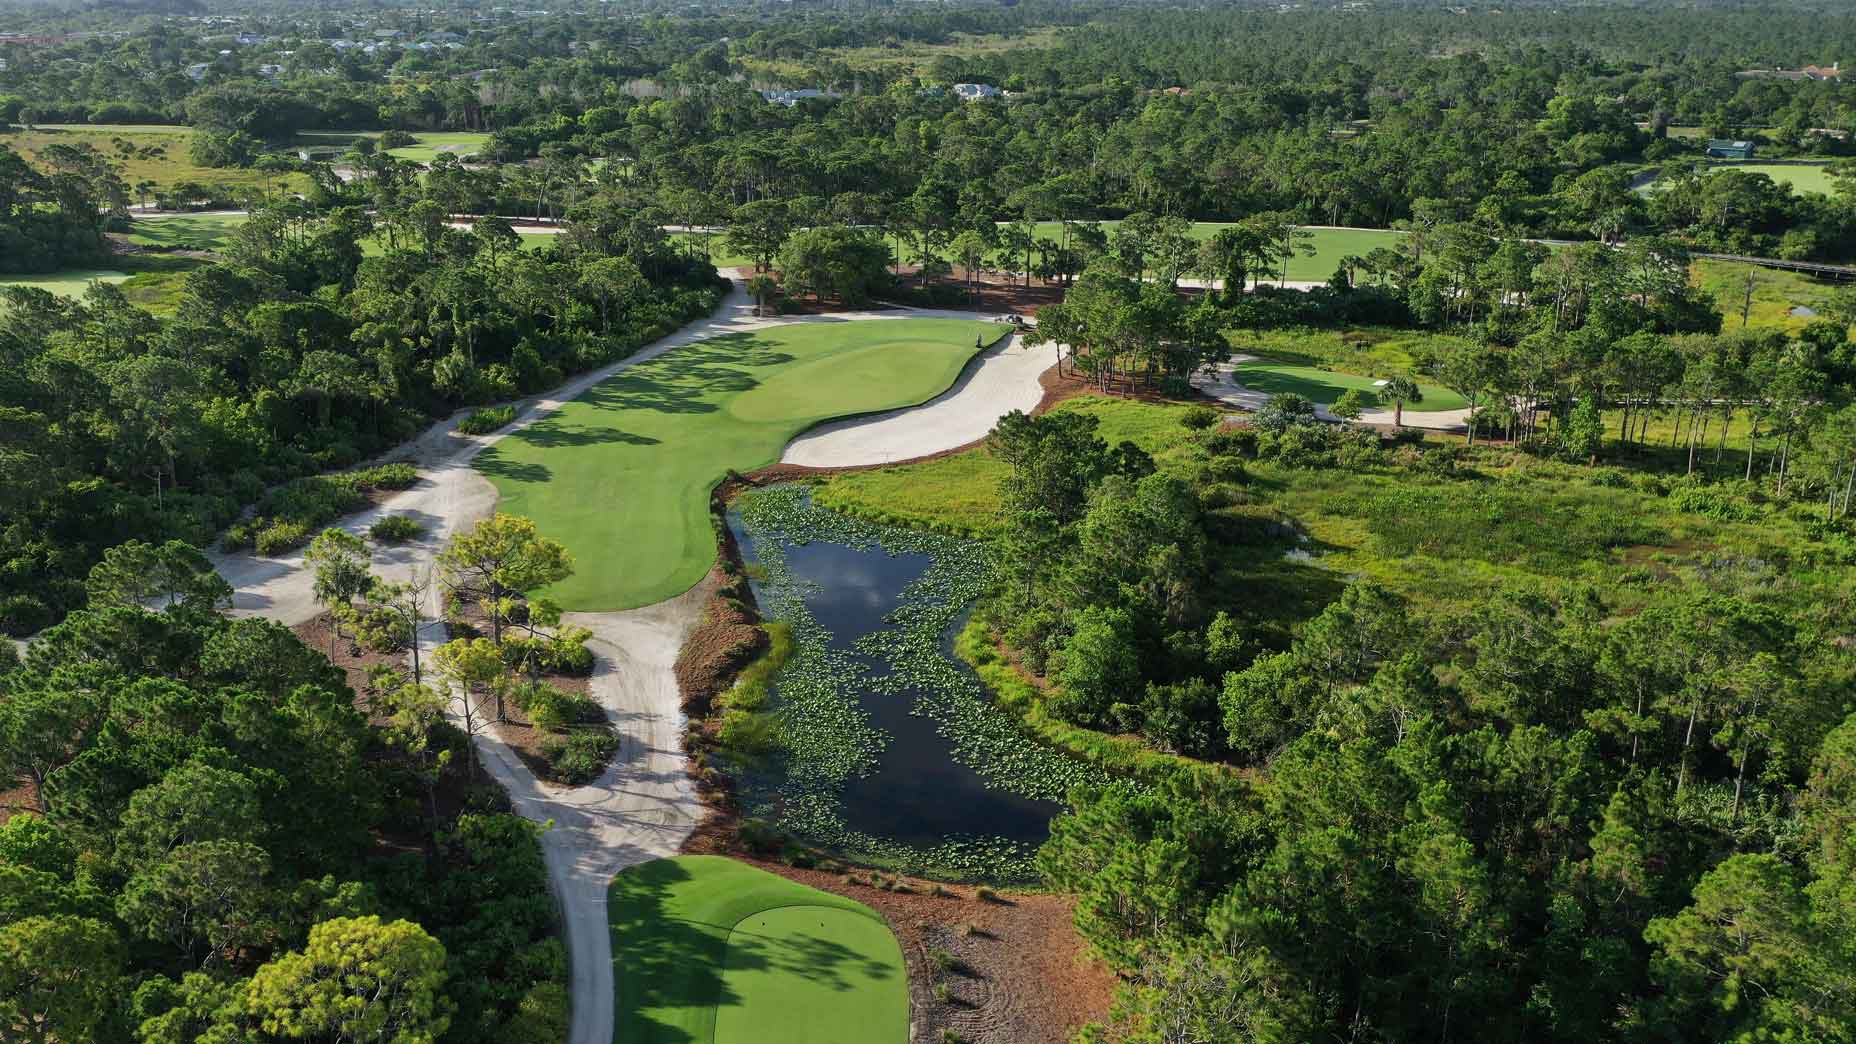 An aerial drone view of the 12th hole at Medalist Golf Club.